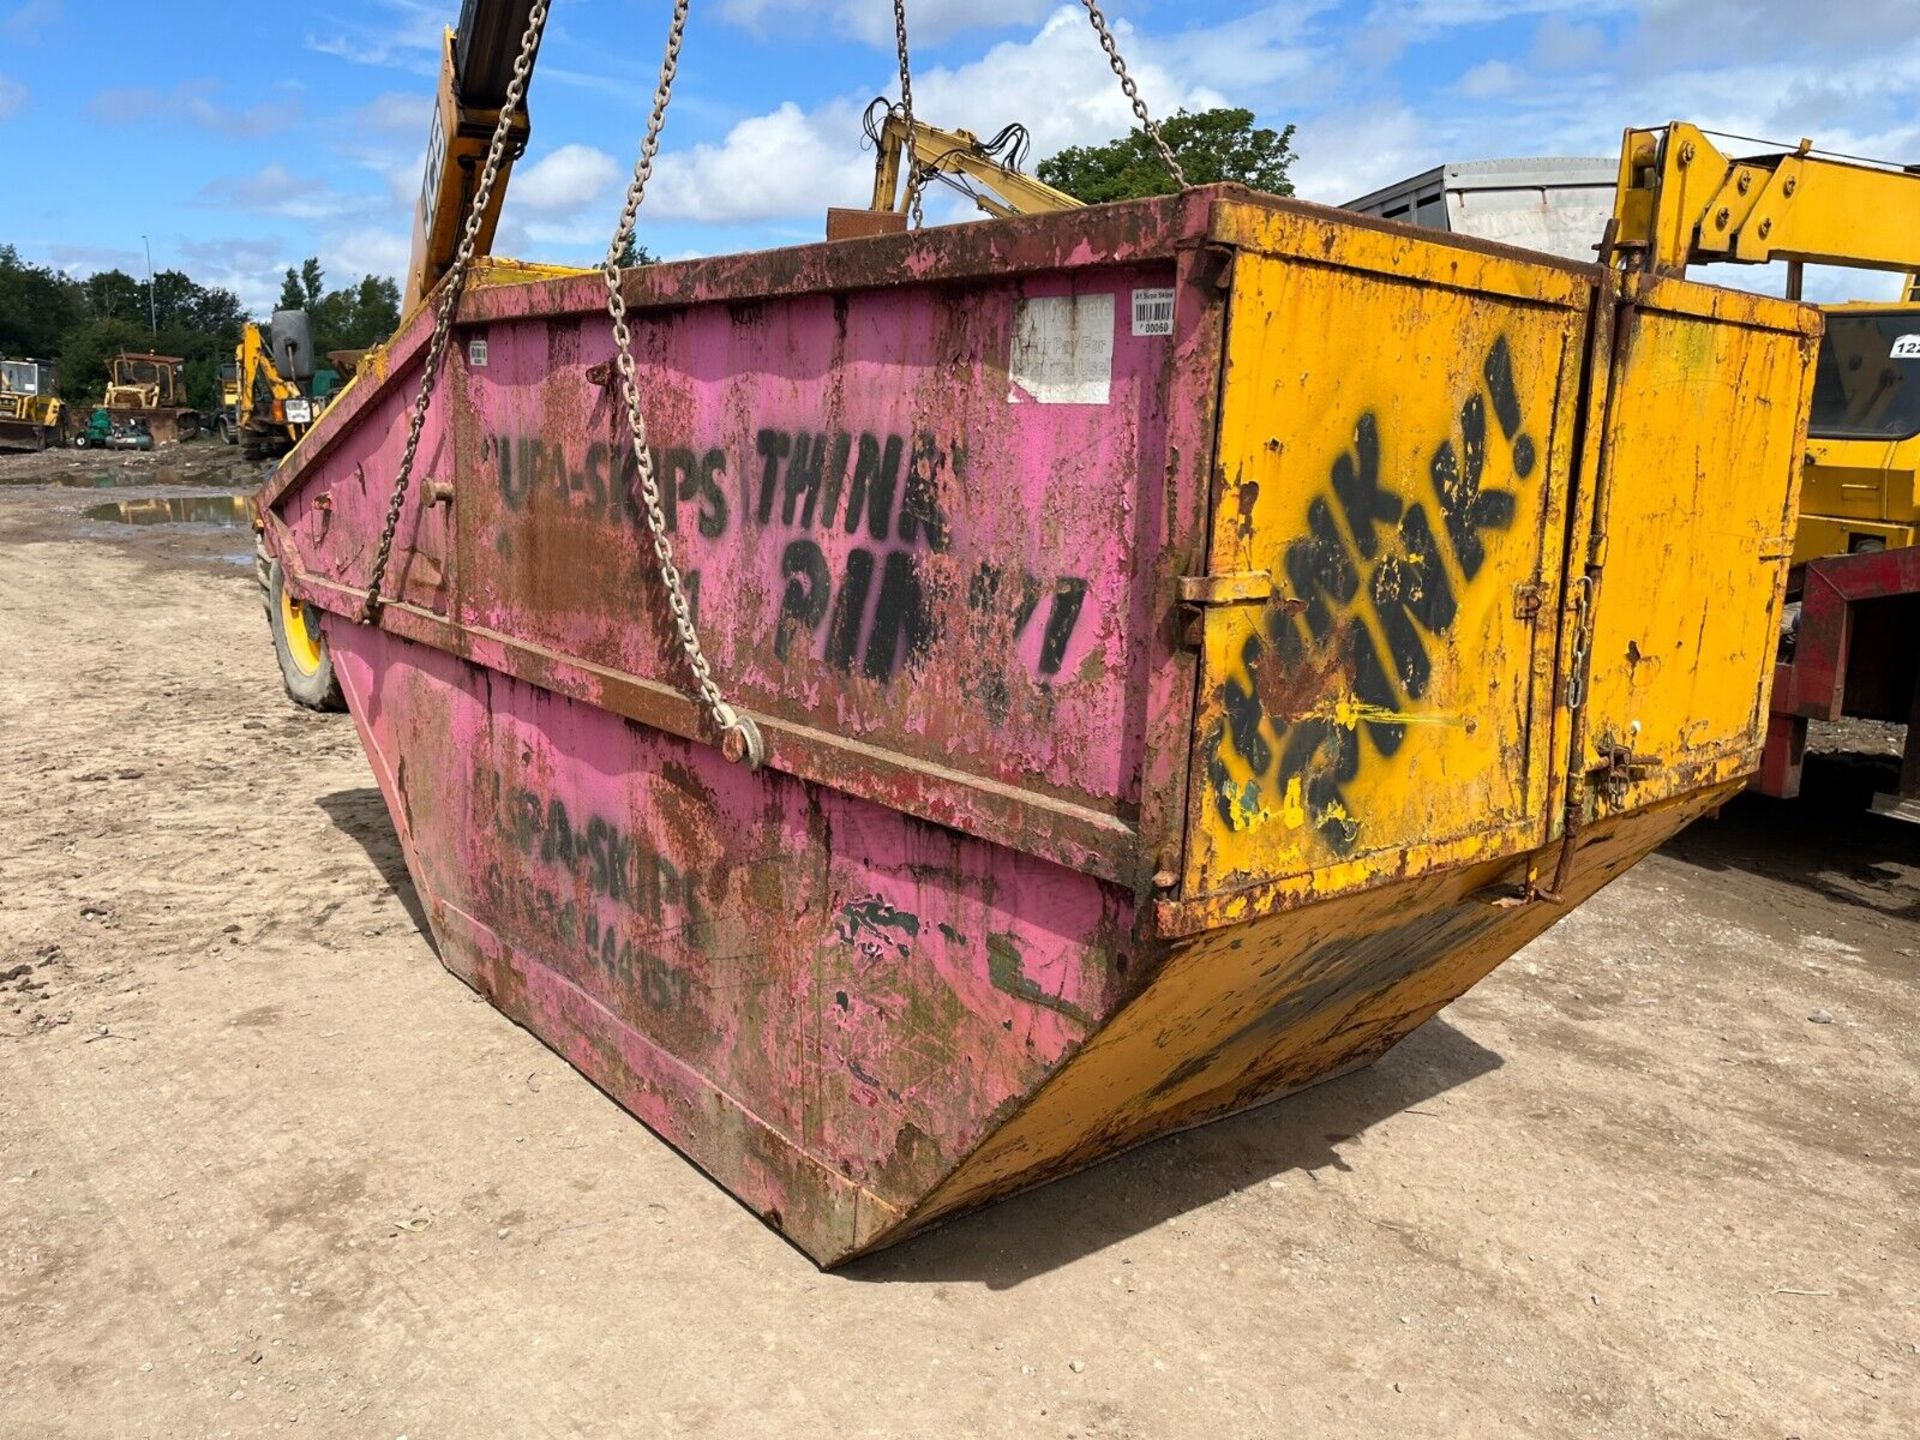 14 YARD CHAIN SKIP WAGON TRUCK AUCTION IS FOR 1 X SKIP IN USEABLE CONDITION